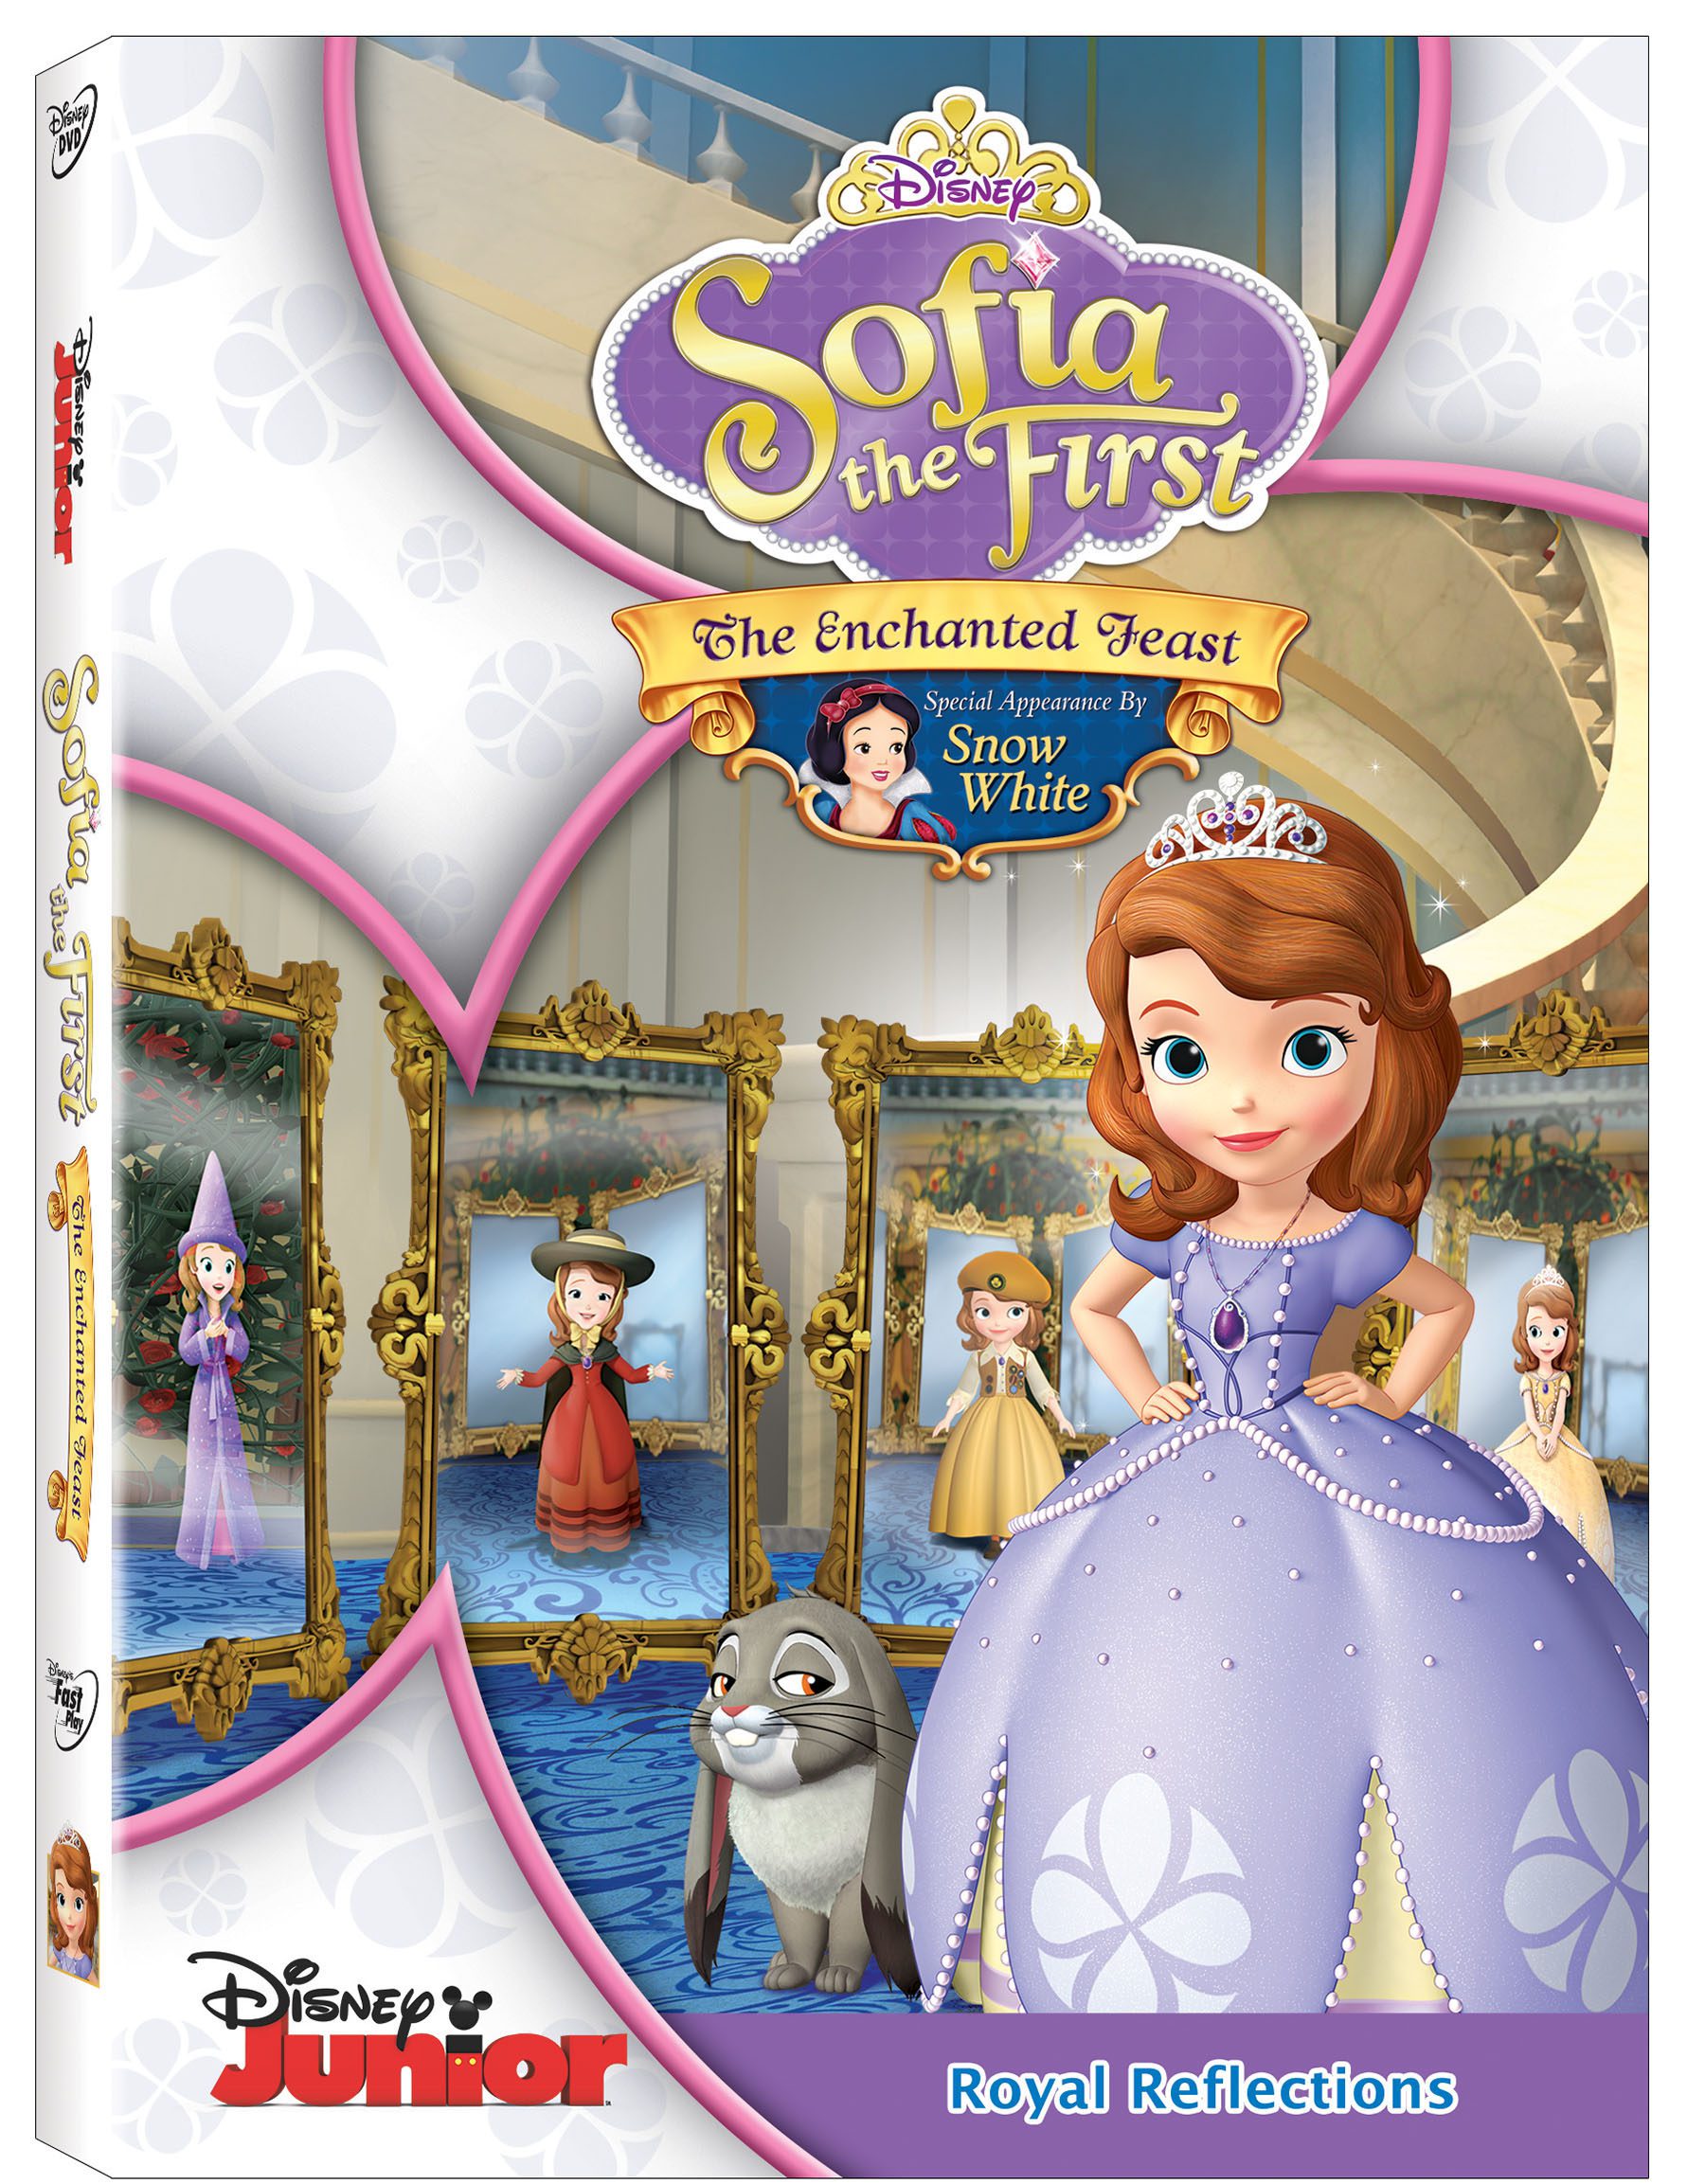 Sofia The First: The Enchanted Feast on DVD August 5th, 2014